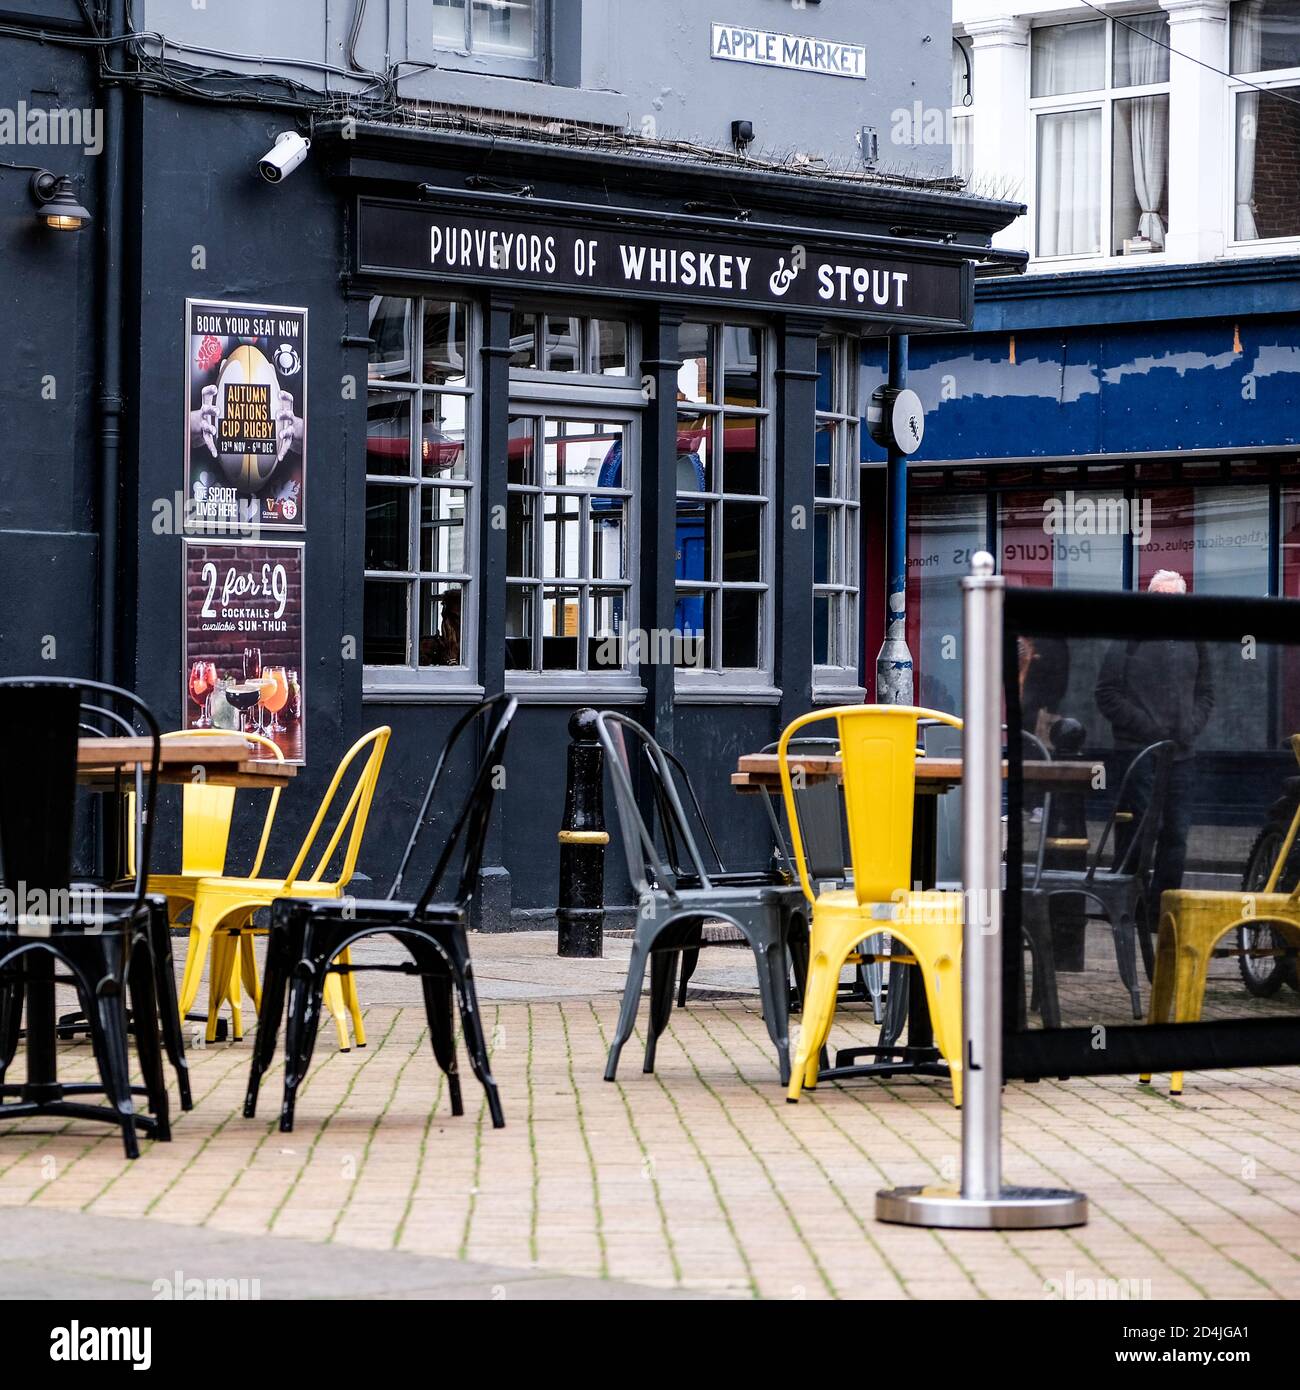 London UK October 09 2020, O’Neils Pub Hospitality Chain Business With No Customers In Ourside Seating Area Amid COVID-19 Pandemic Stock Photo